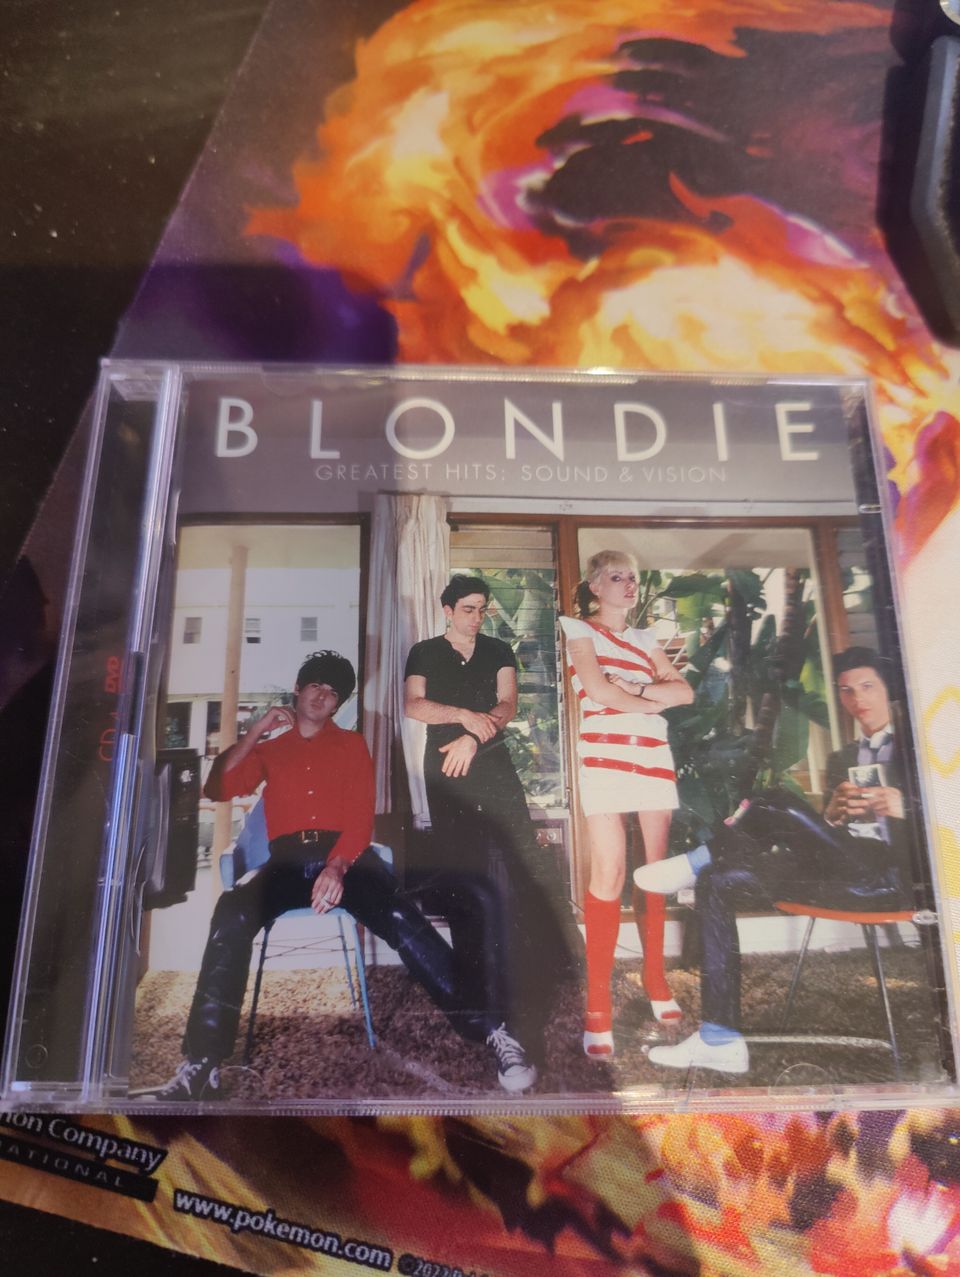 Blondie Greatest hits sound and vision